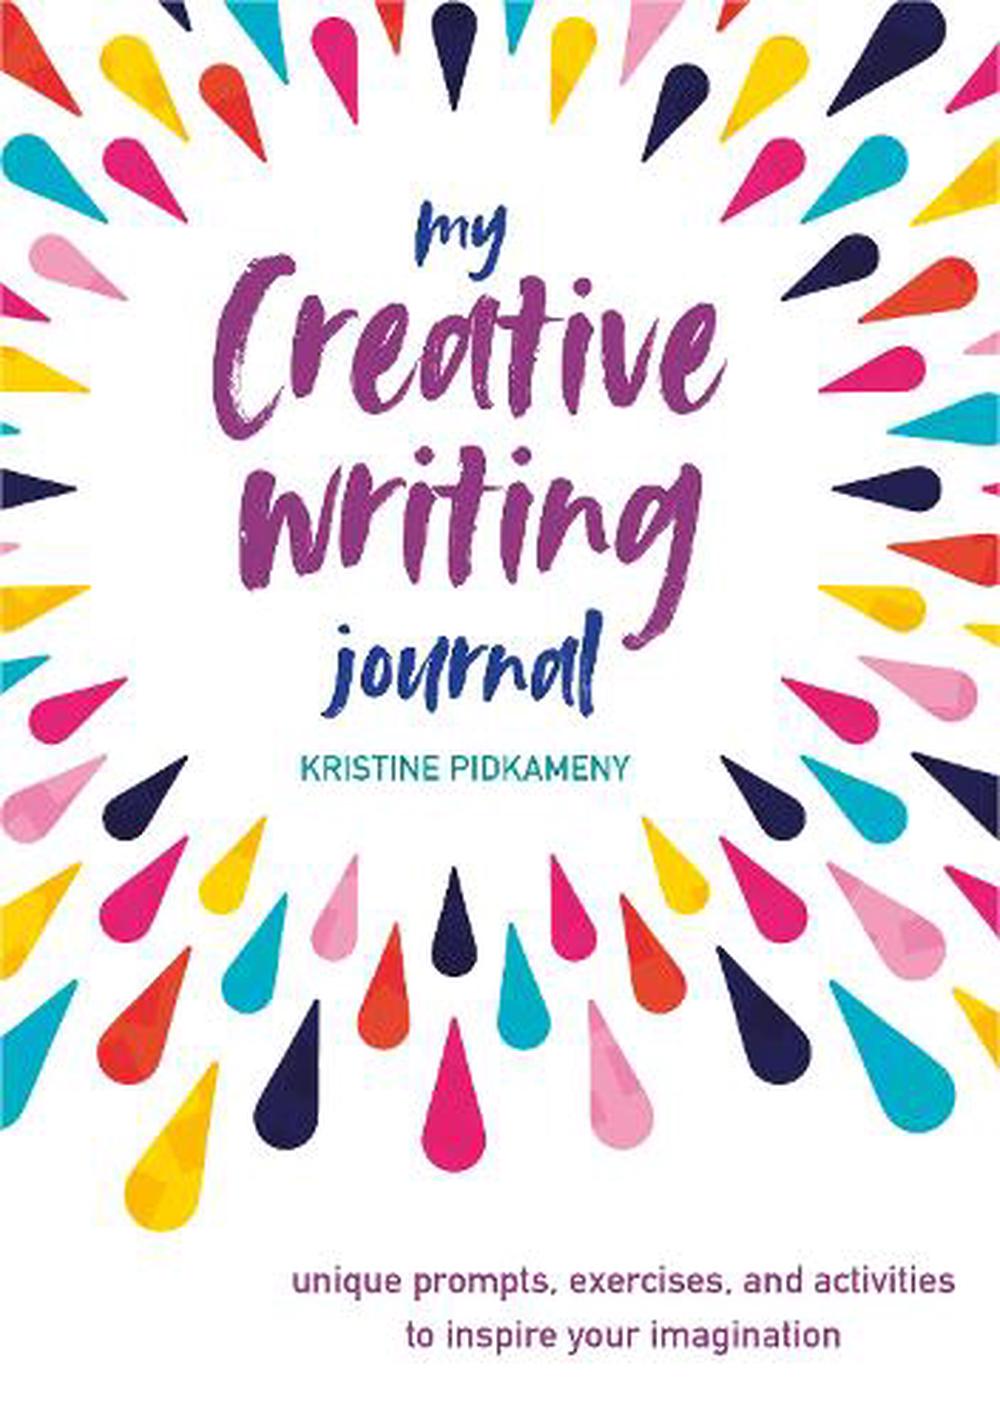 journal about creative writing